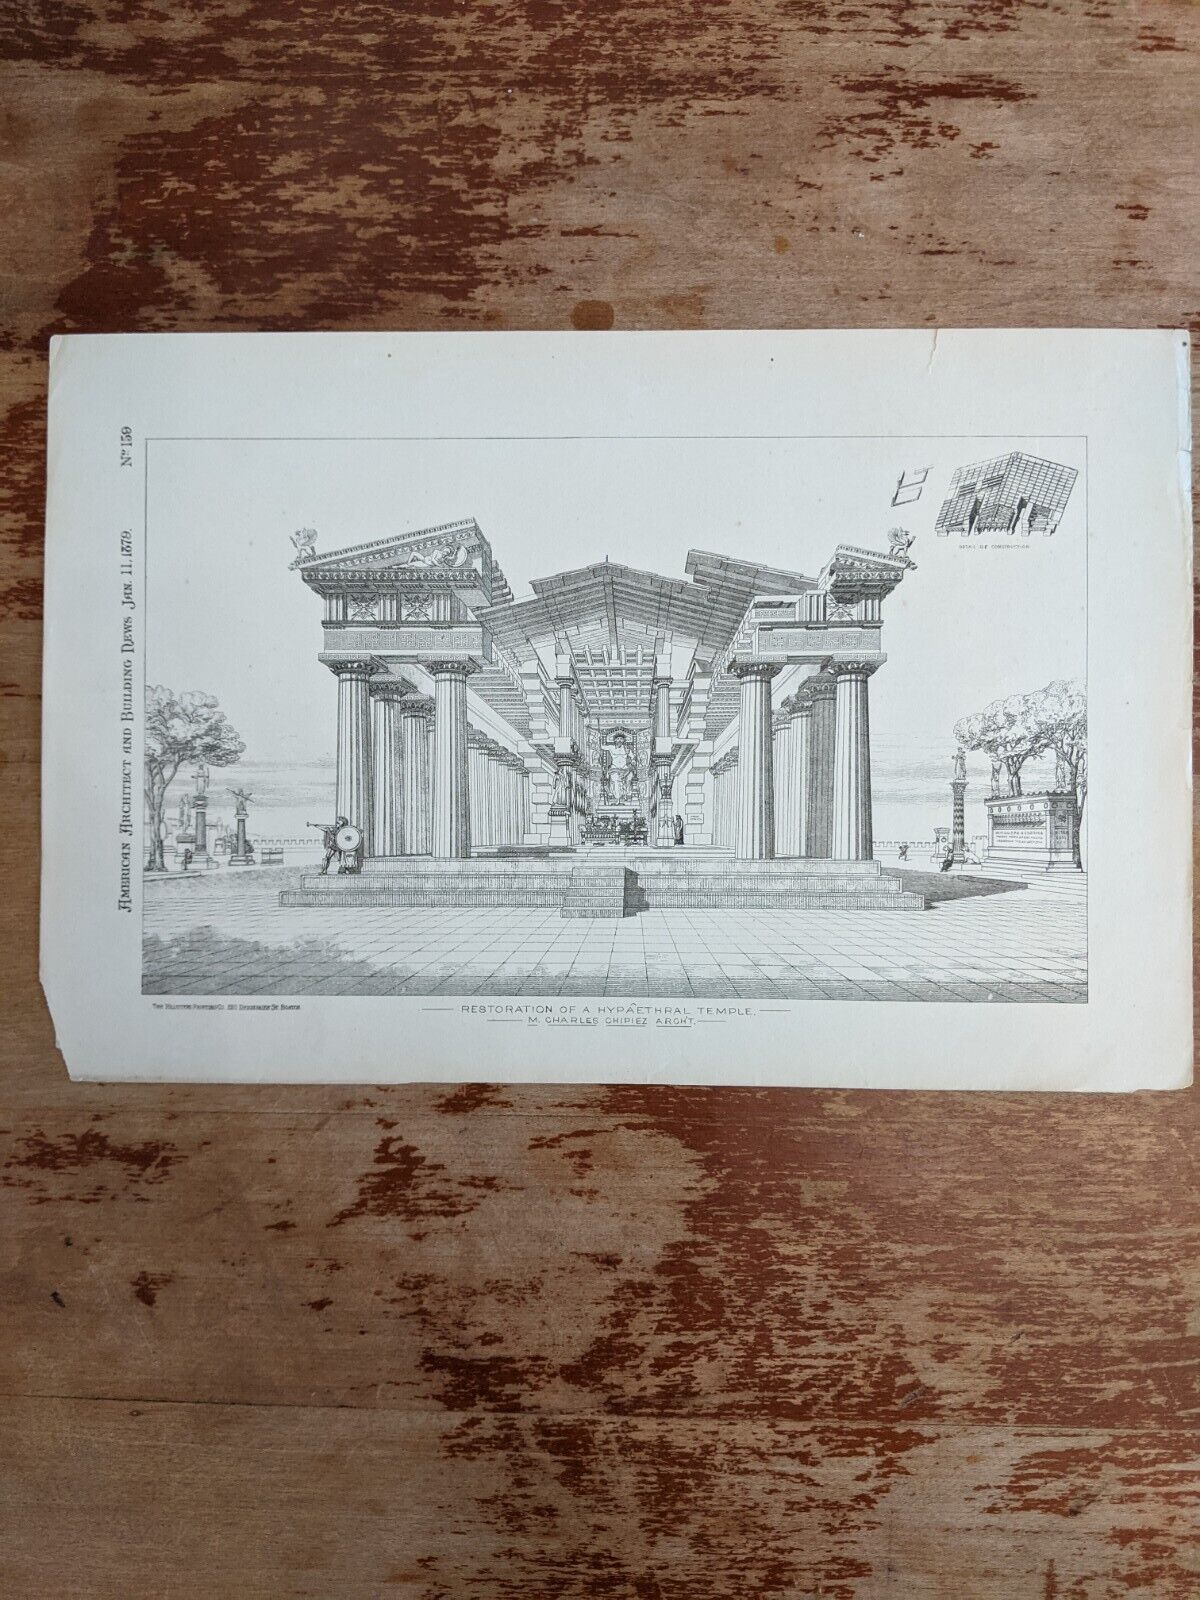 Victorian American Architect and Building Book Plates Lithograph Engraving